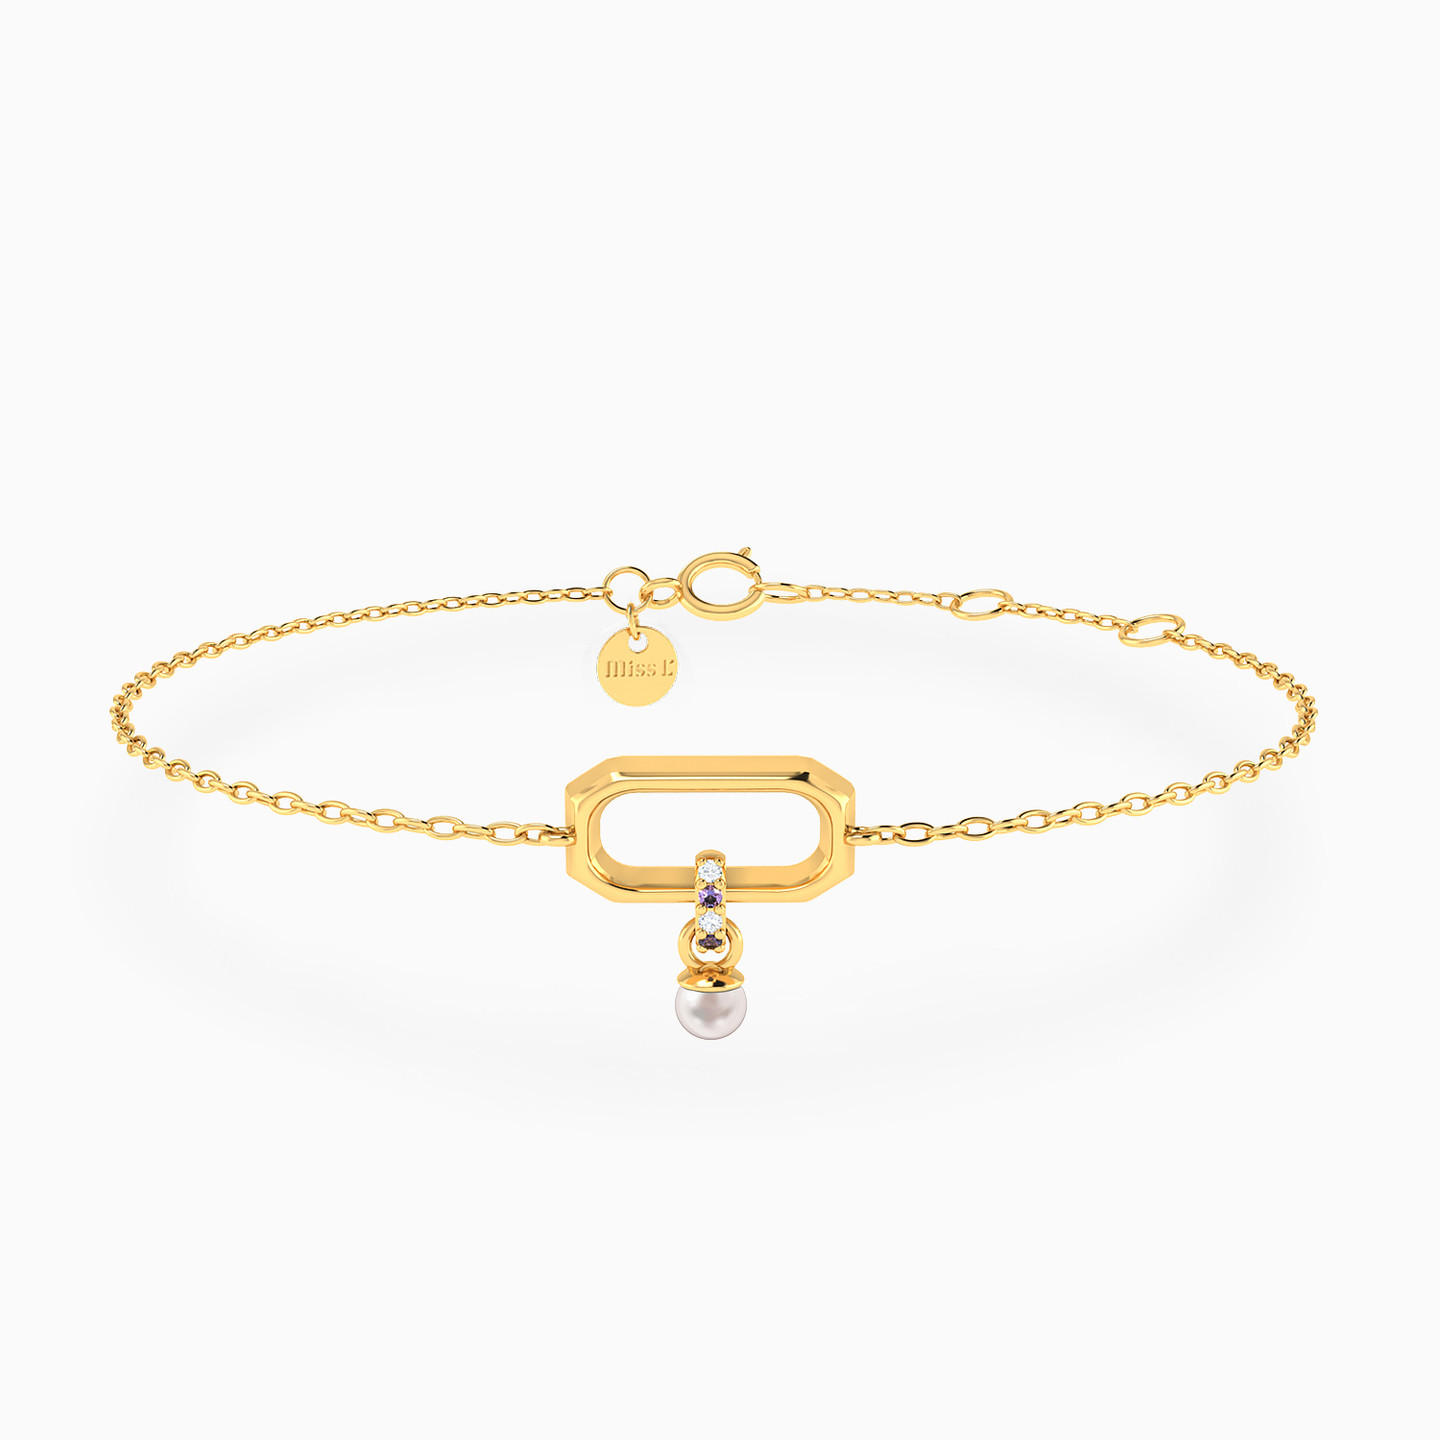 Rectangle Shaped Pearls & Colored Stones Chain Bracelet in 18K Gold